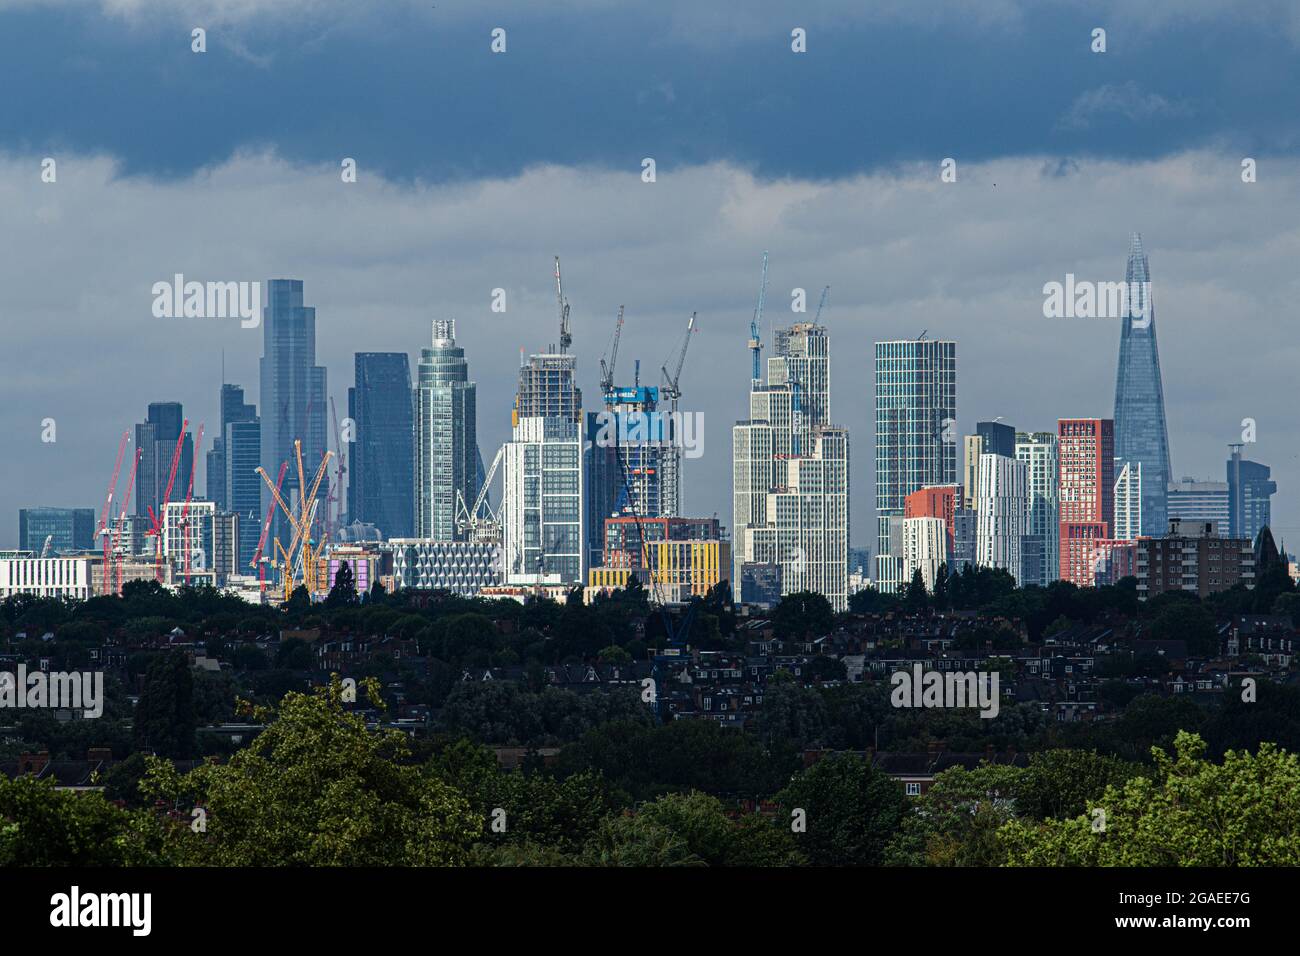 London, UK. 30 July 2021. The London Shard and city skyline financial district is shrouded under storm clouds with unpredictable weather of sunshine showers and gale force winds from Storm Evert in London and southern parts of England. Credit amer ghazzal/Alamy Live News. Stock Photo